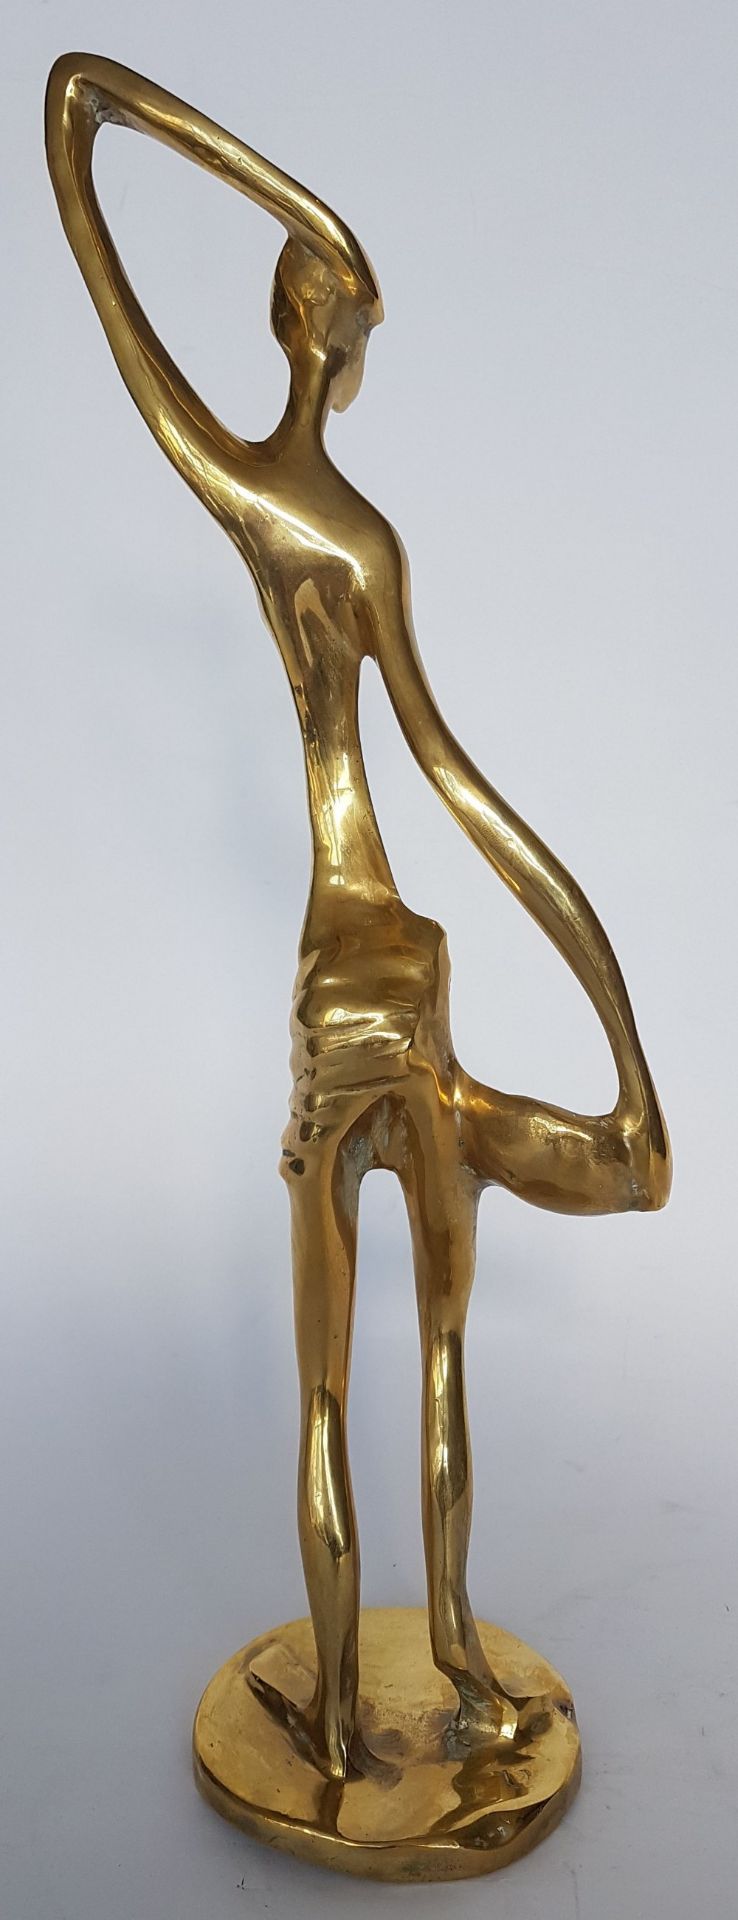 Alfred Liyolo (Born in 1943), Attributed toWoman with a basket; Gilded bronze sculpture. 42 x 15 x - Image 3 of 6